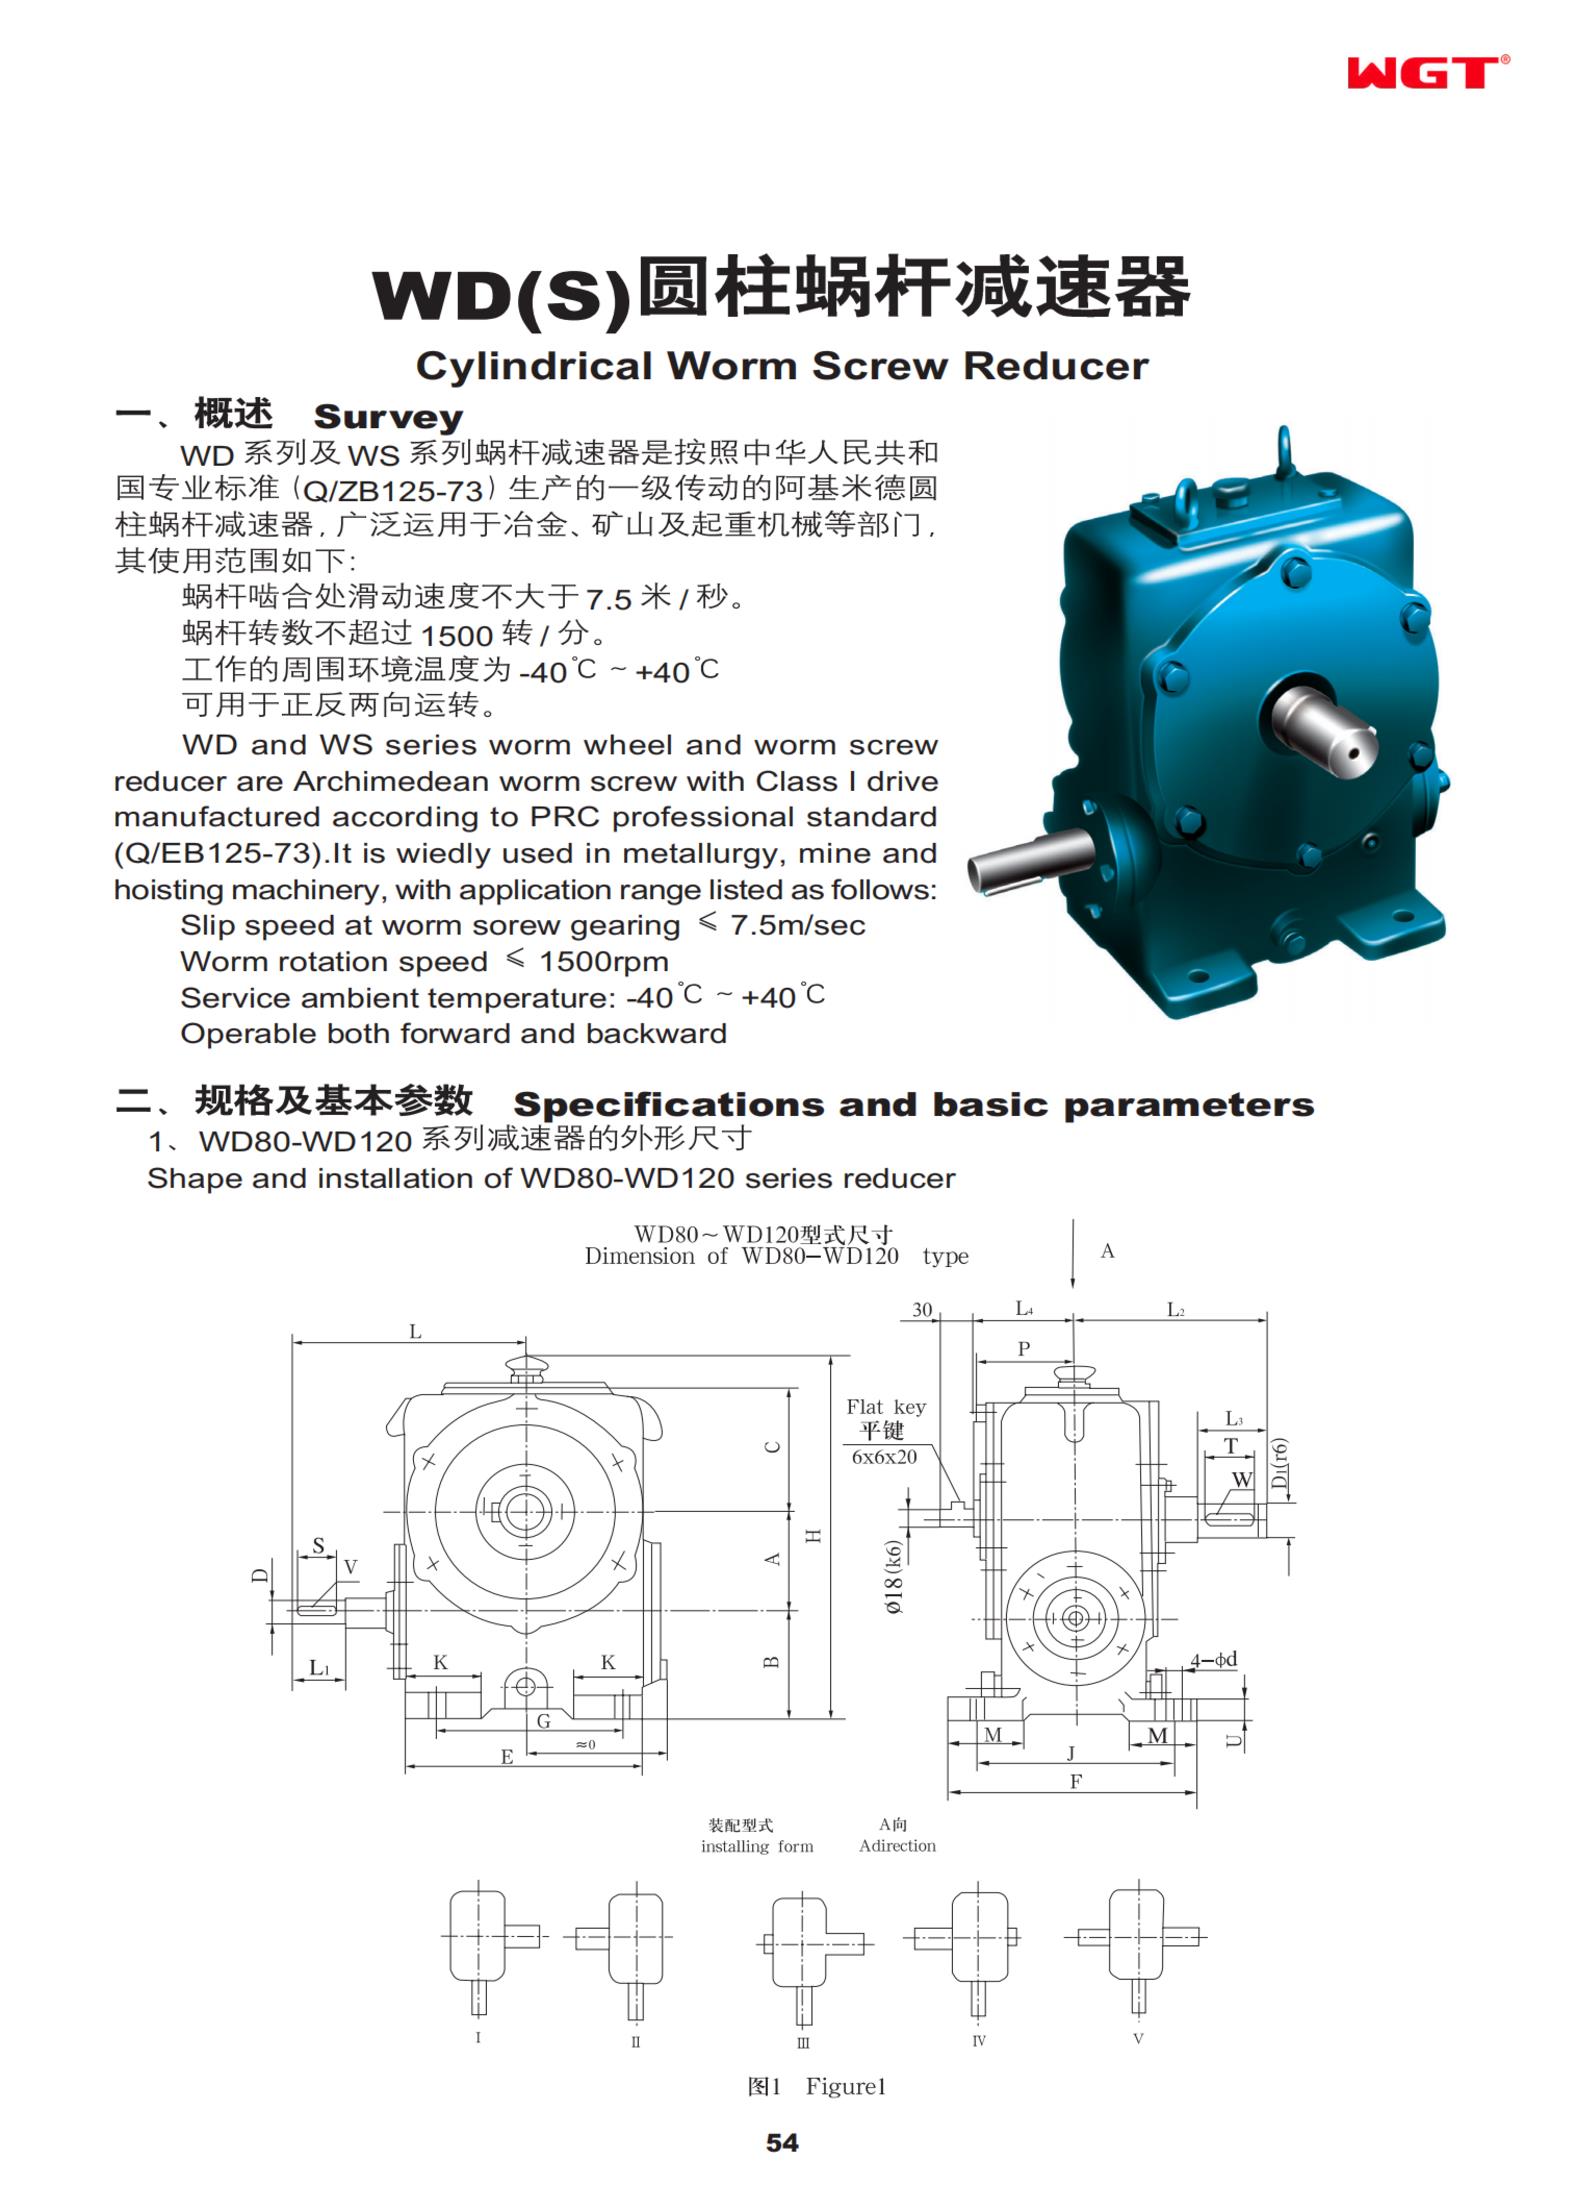 WD180 cylindrical worm reducer WGT